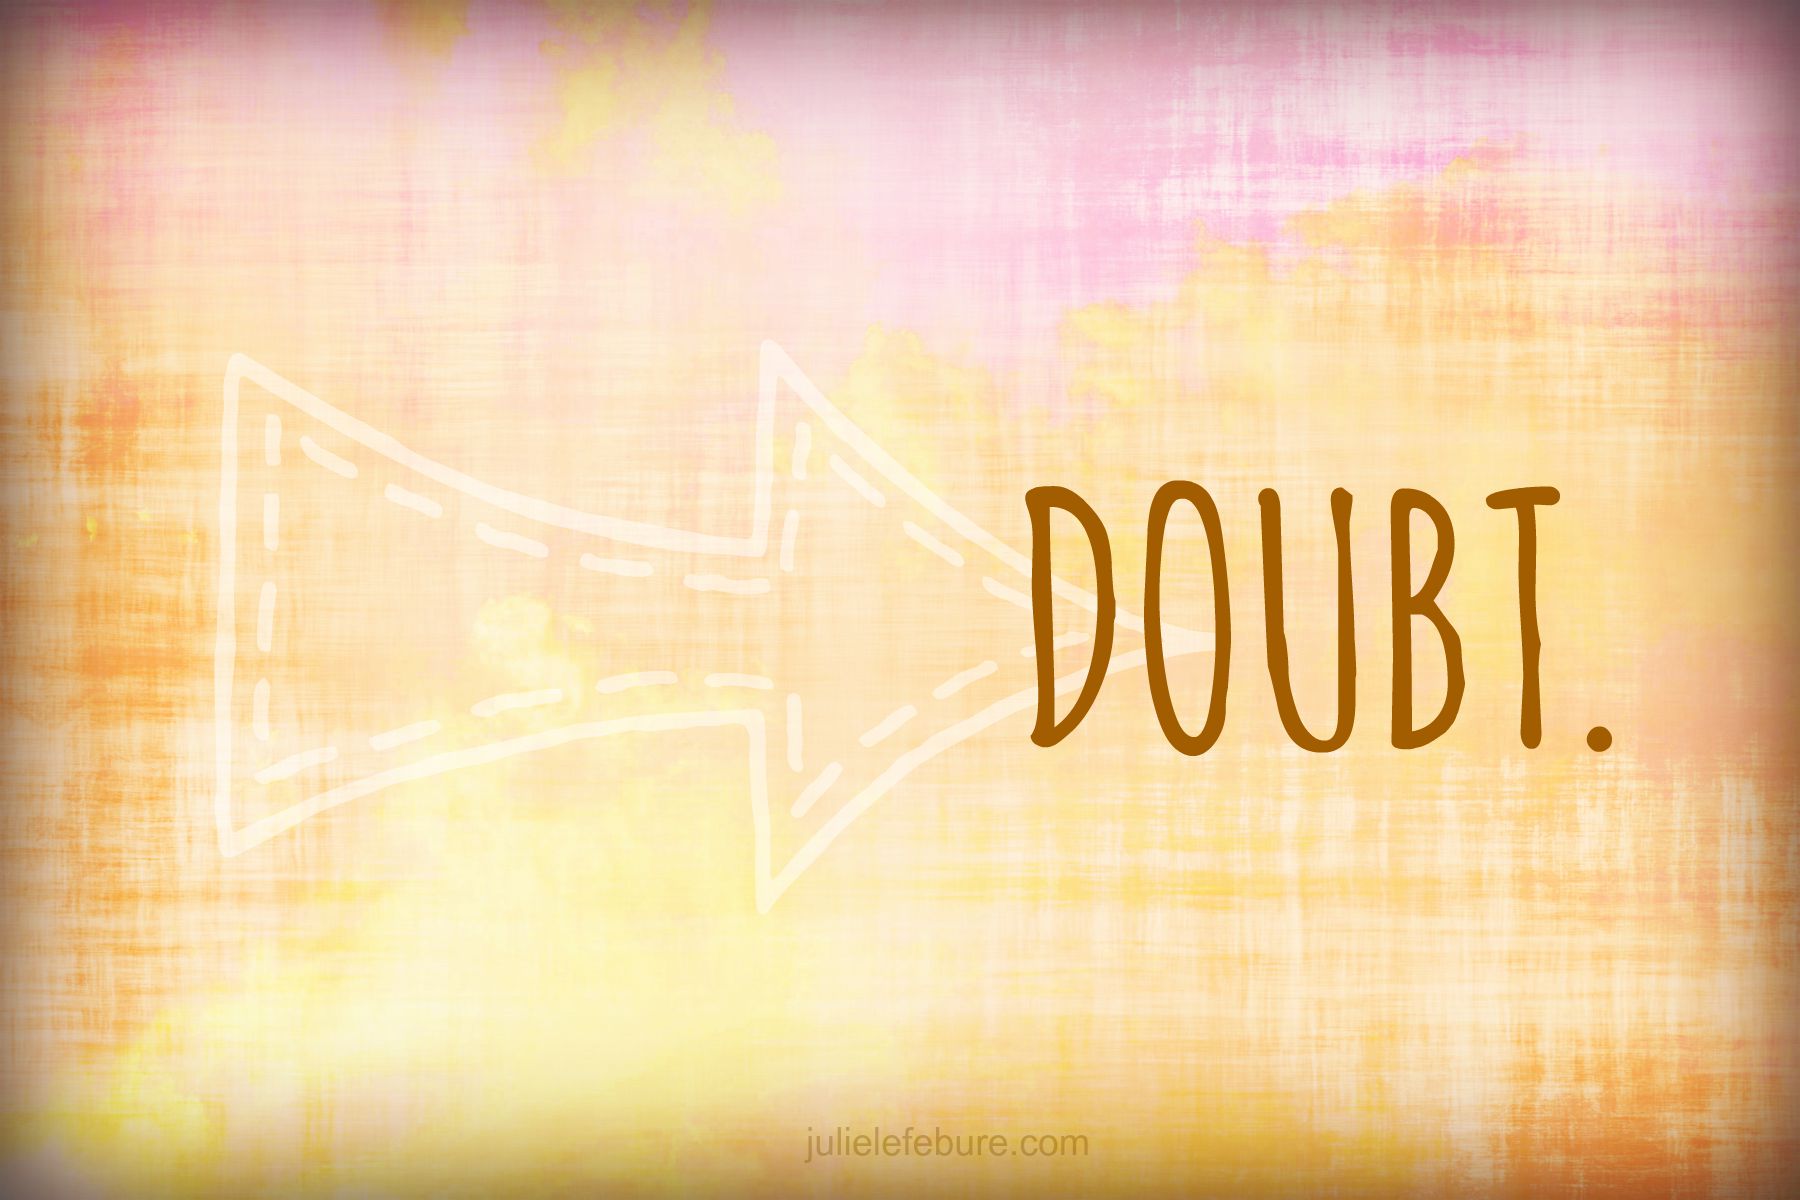 Five Minute Friday – Doubt